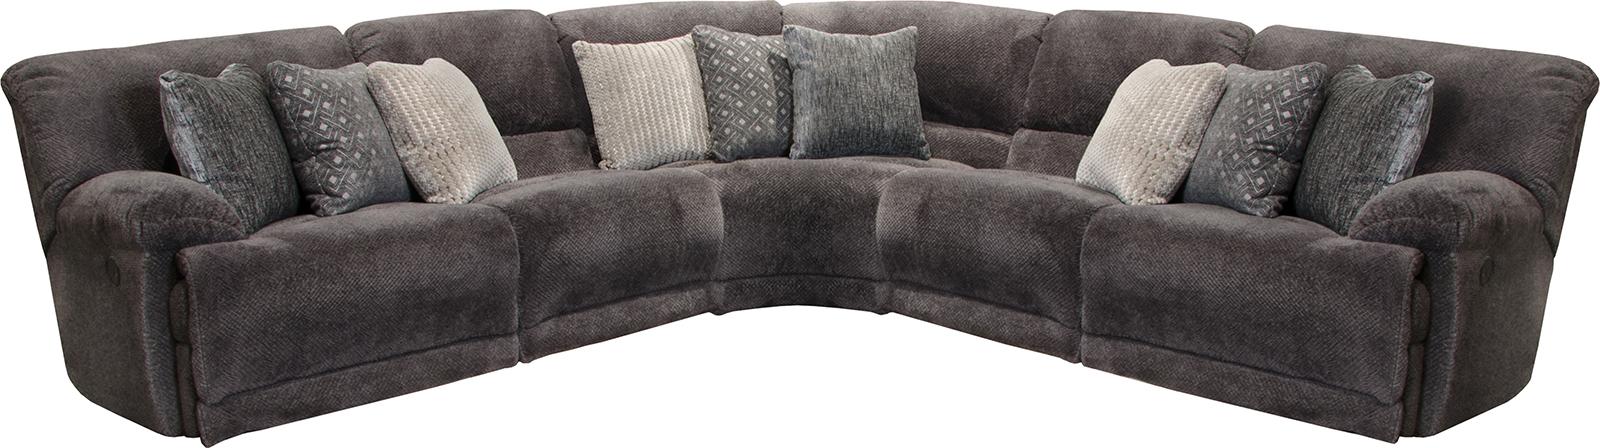 Catnapper Furniture Burbank 5pc Sectional in Smoke - Factory Furniture Outlet Store